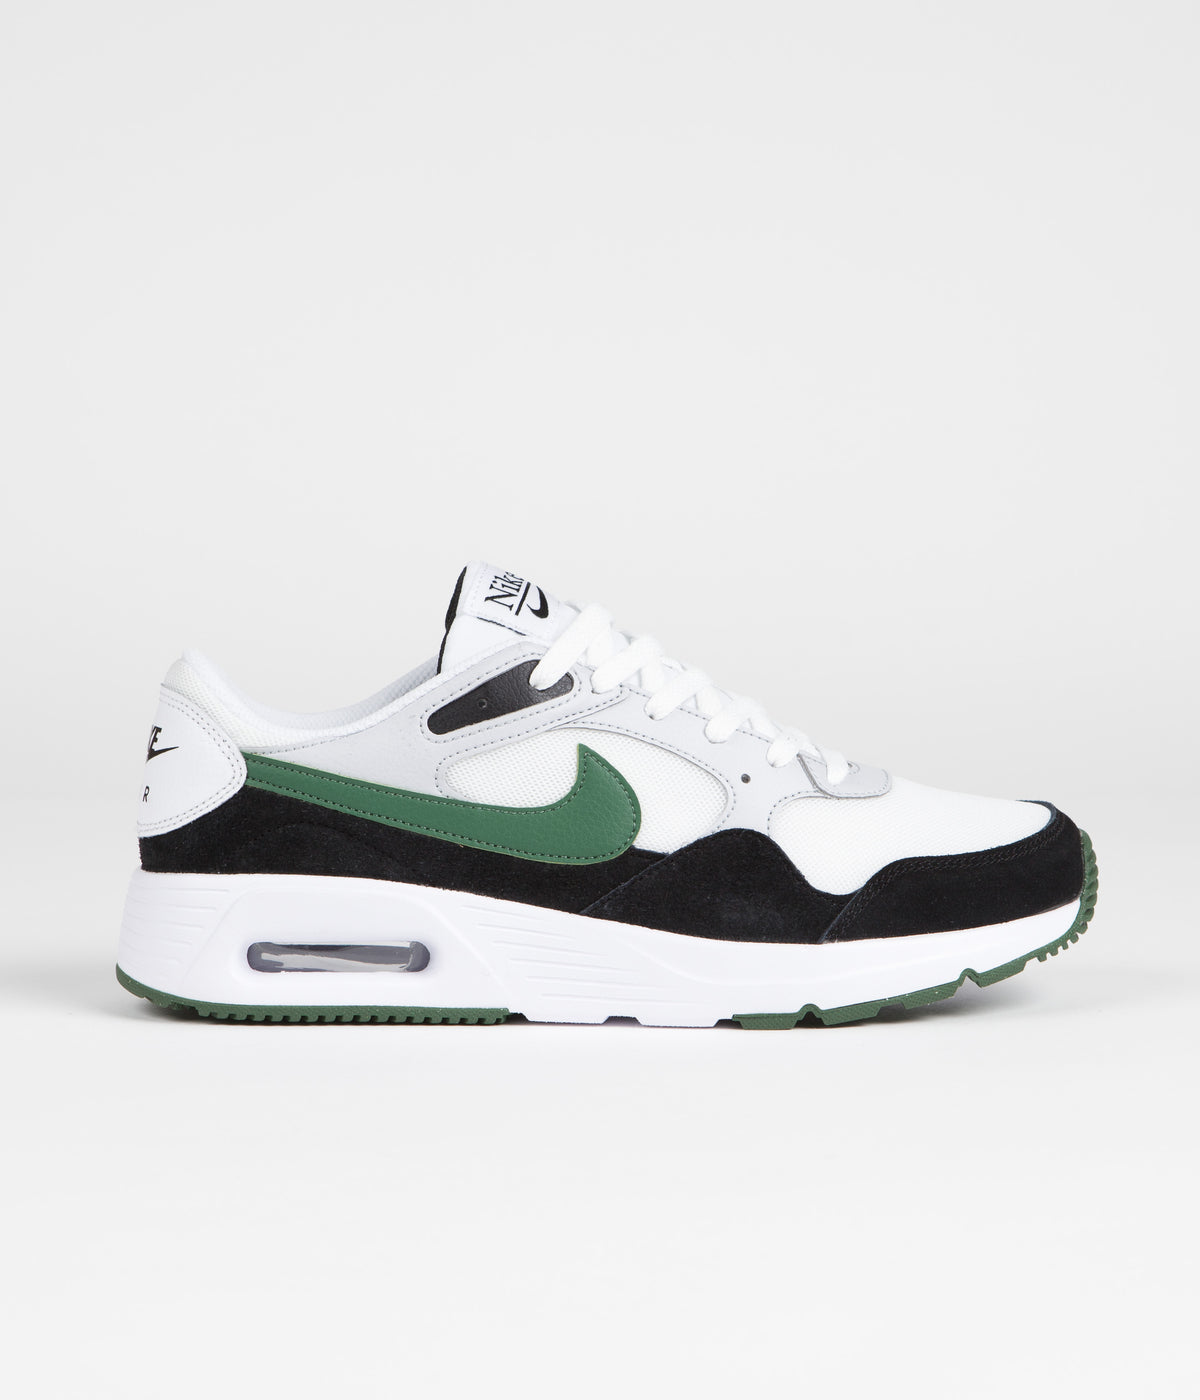 Nike Air Max SC Shoes - White / Gorge Green - Black - Pure Platinum |  Always in Colour